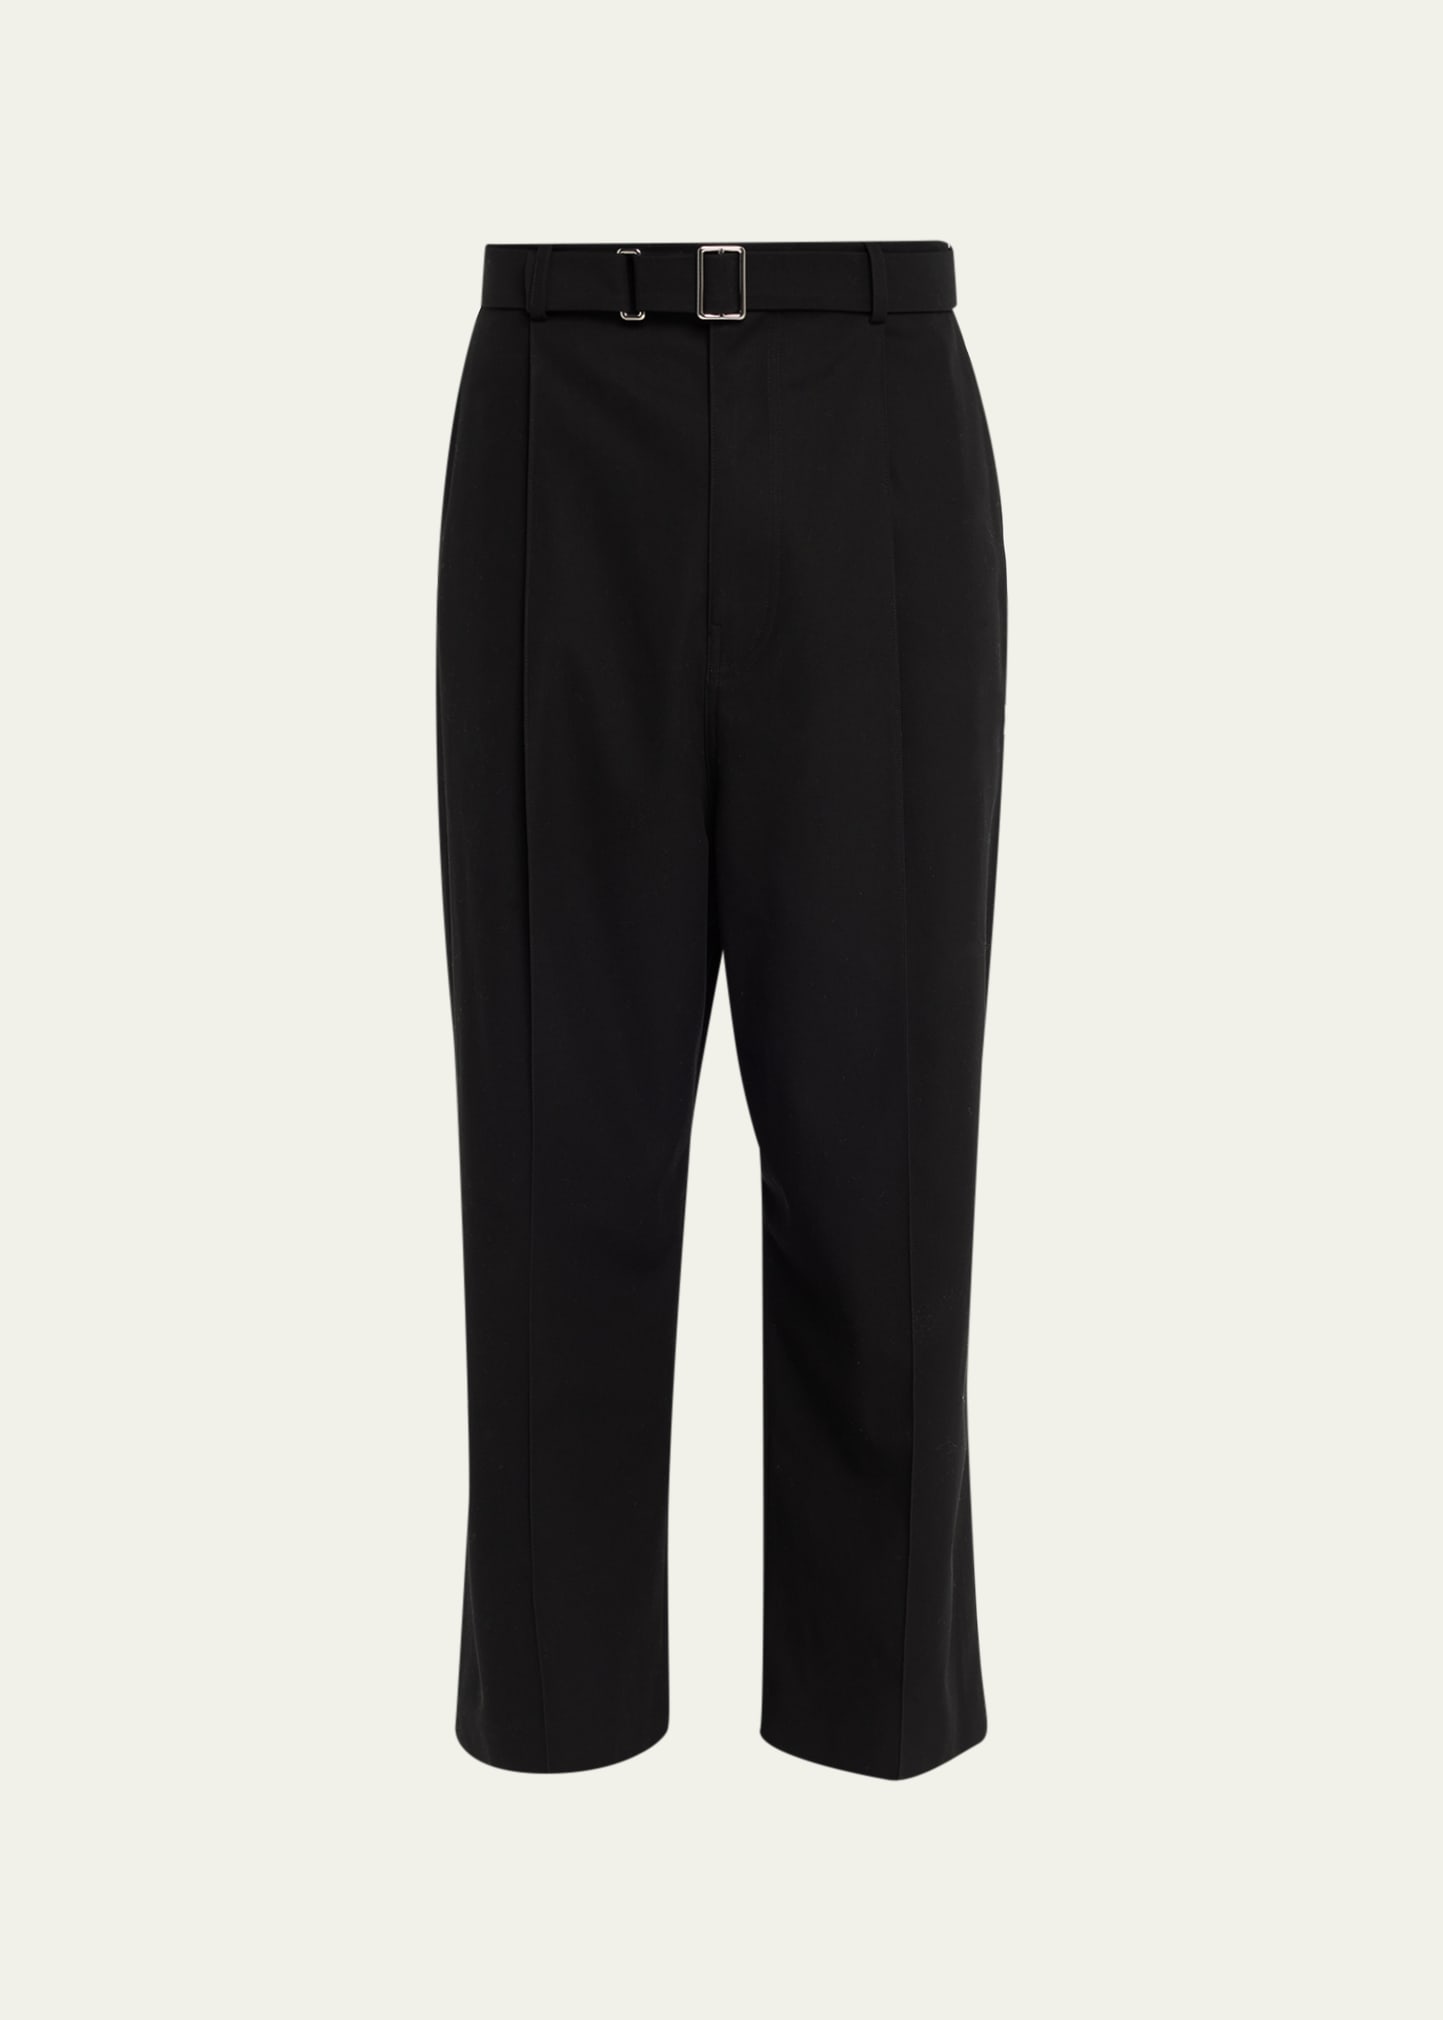 Men's Cotton Workwear Belted Pants